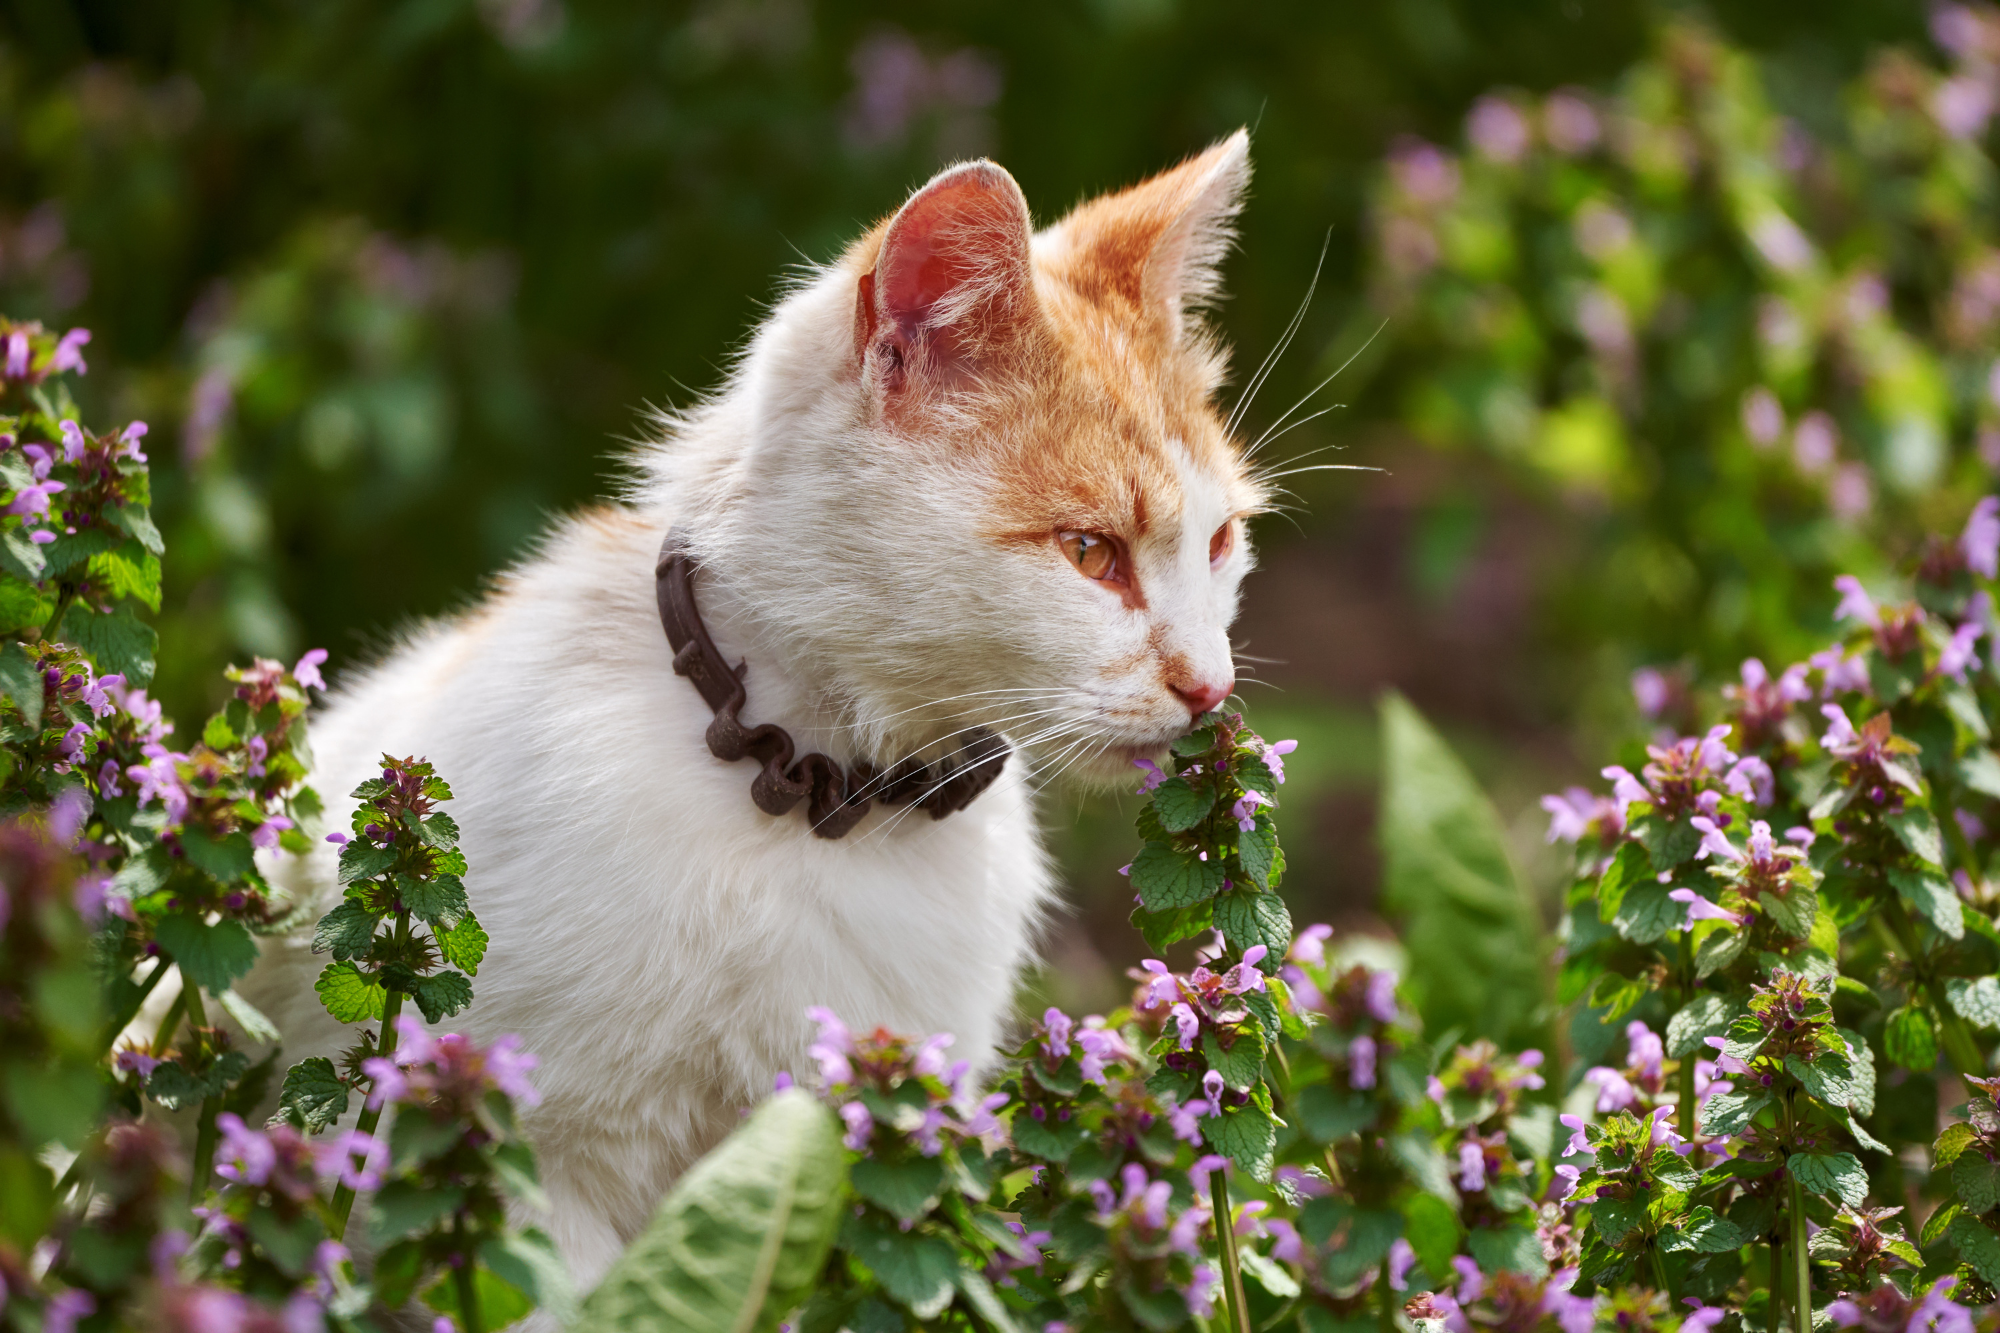 White and orange cat in a field of purple flowers.